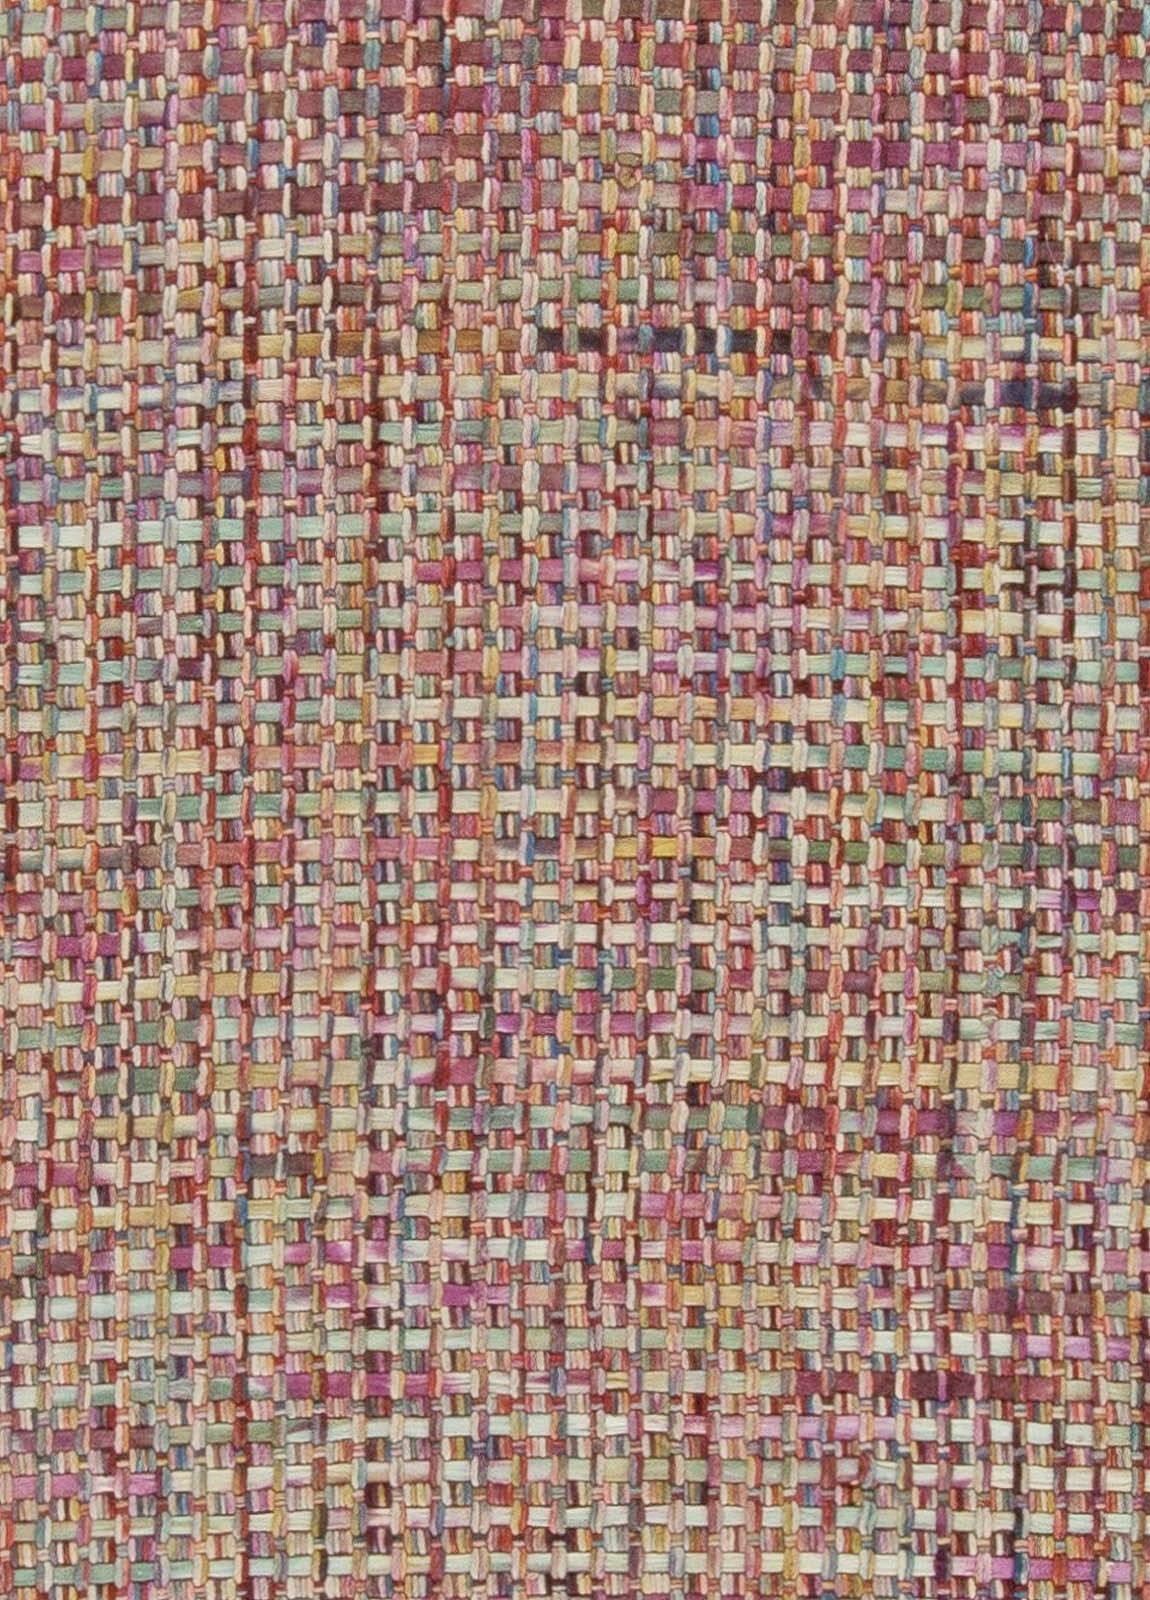 High-Quality Abstract Modern multicolored rug by Doris Leslie Blau.
Size: 12'3